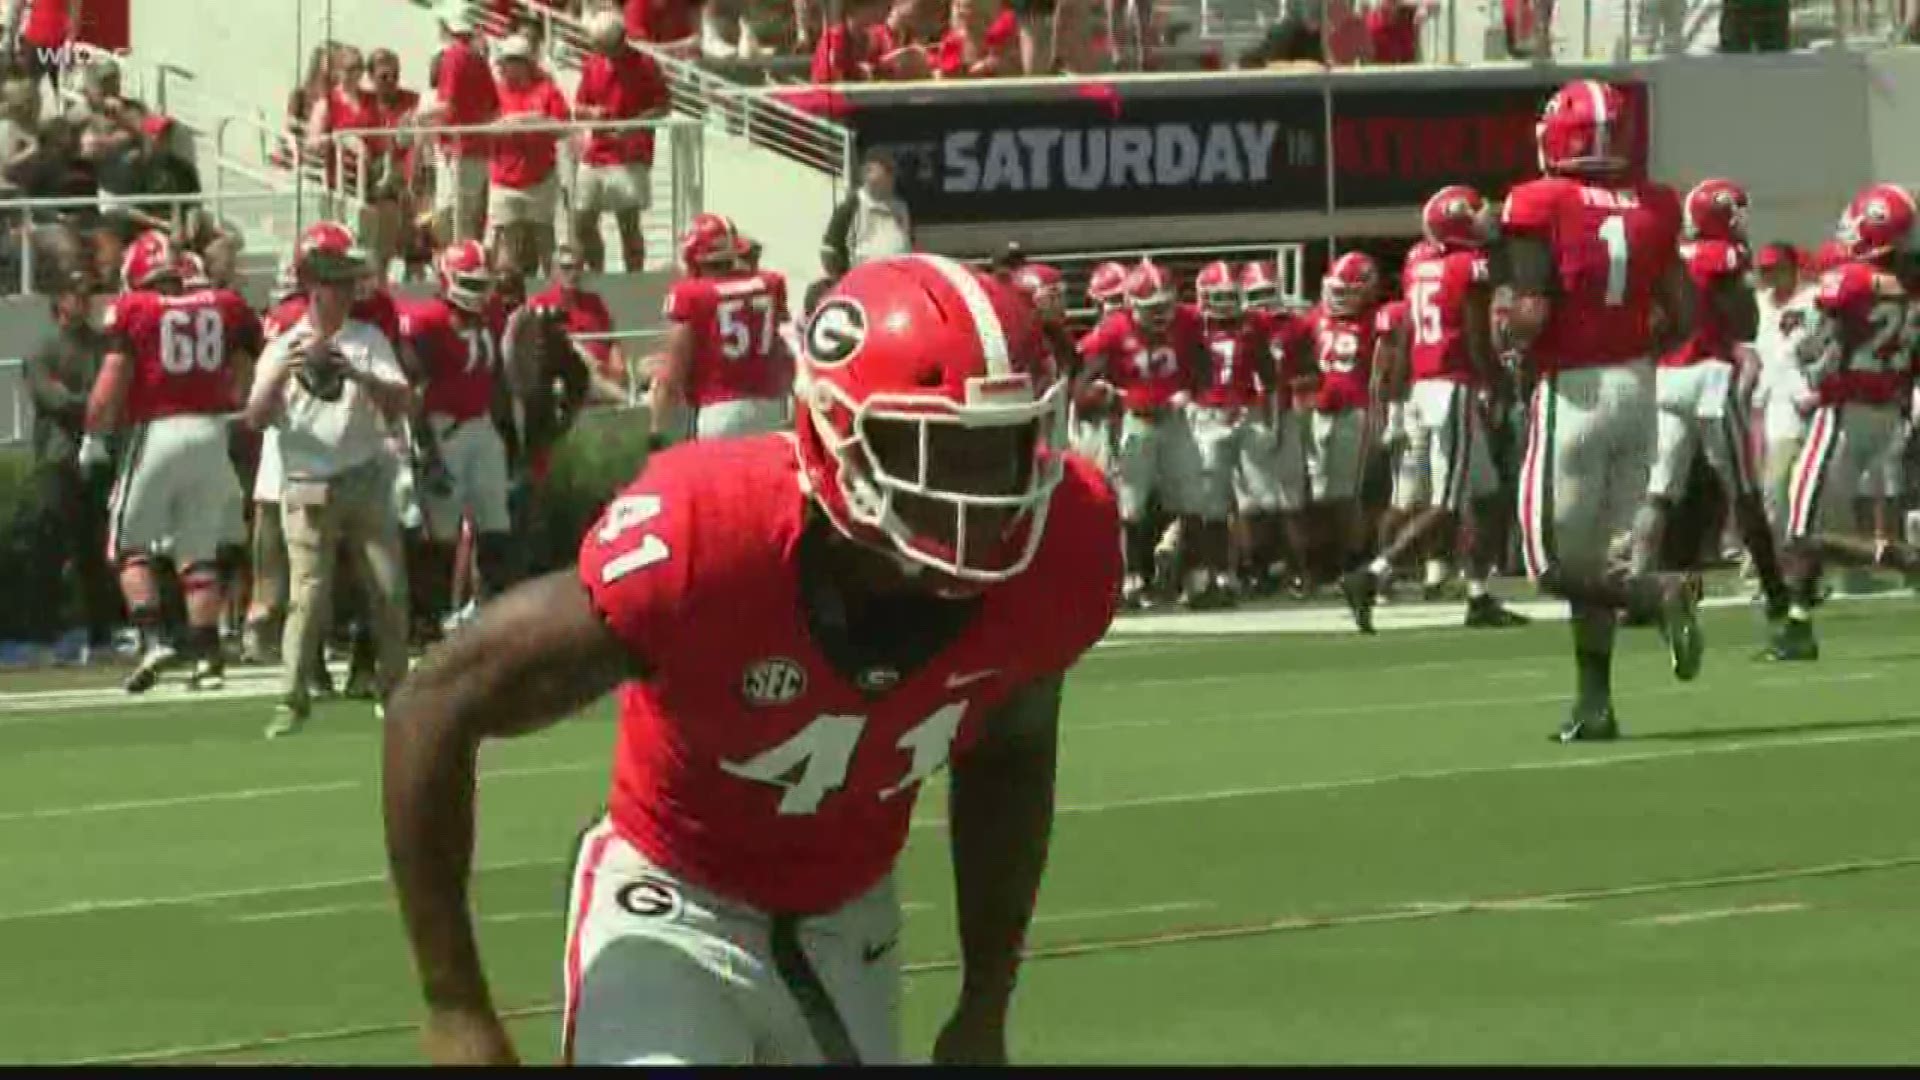 Former Spring Valley linebacker was able to contribute to the Georgia Bulldogs as a freshman. Now UGA Kirby Smart wants to see take the step. Kirby also talks about what he sees happening in the Gamecock program at SEC Media Days.